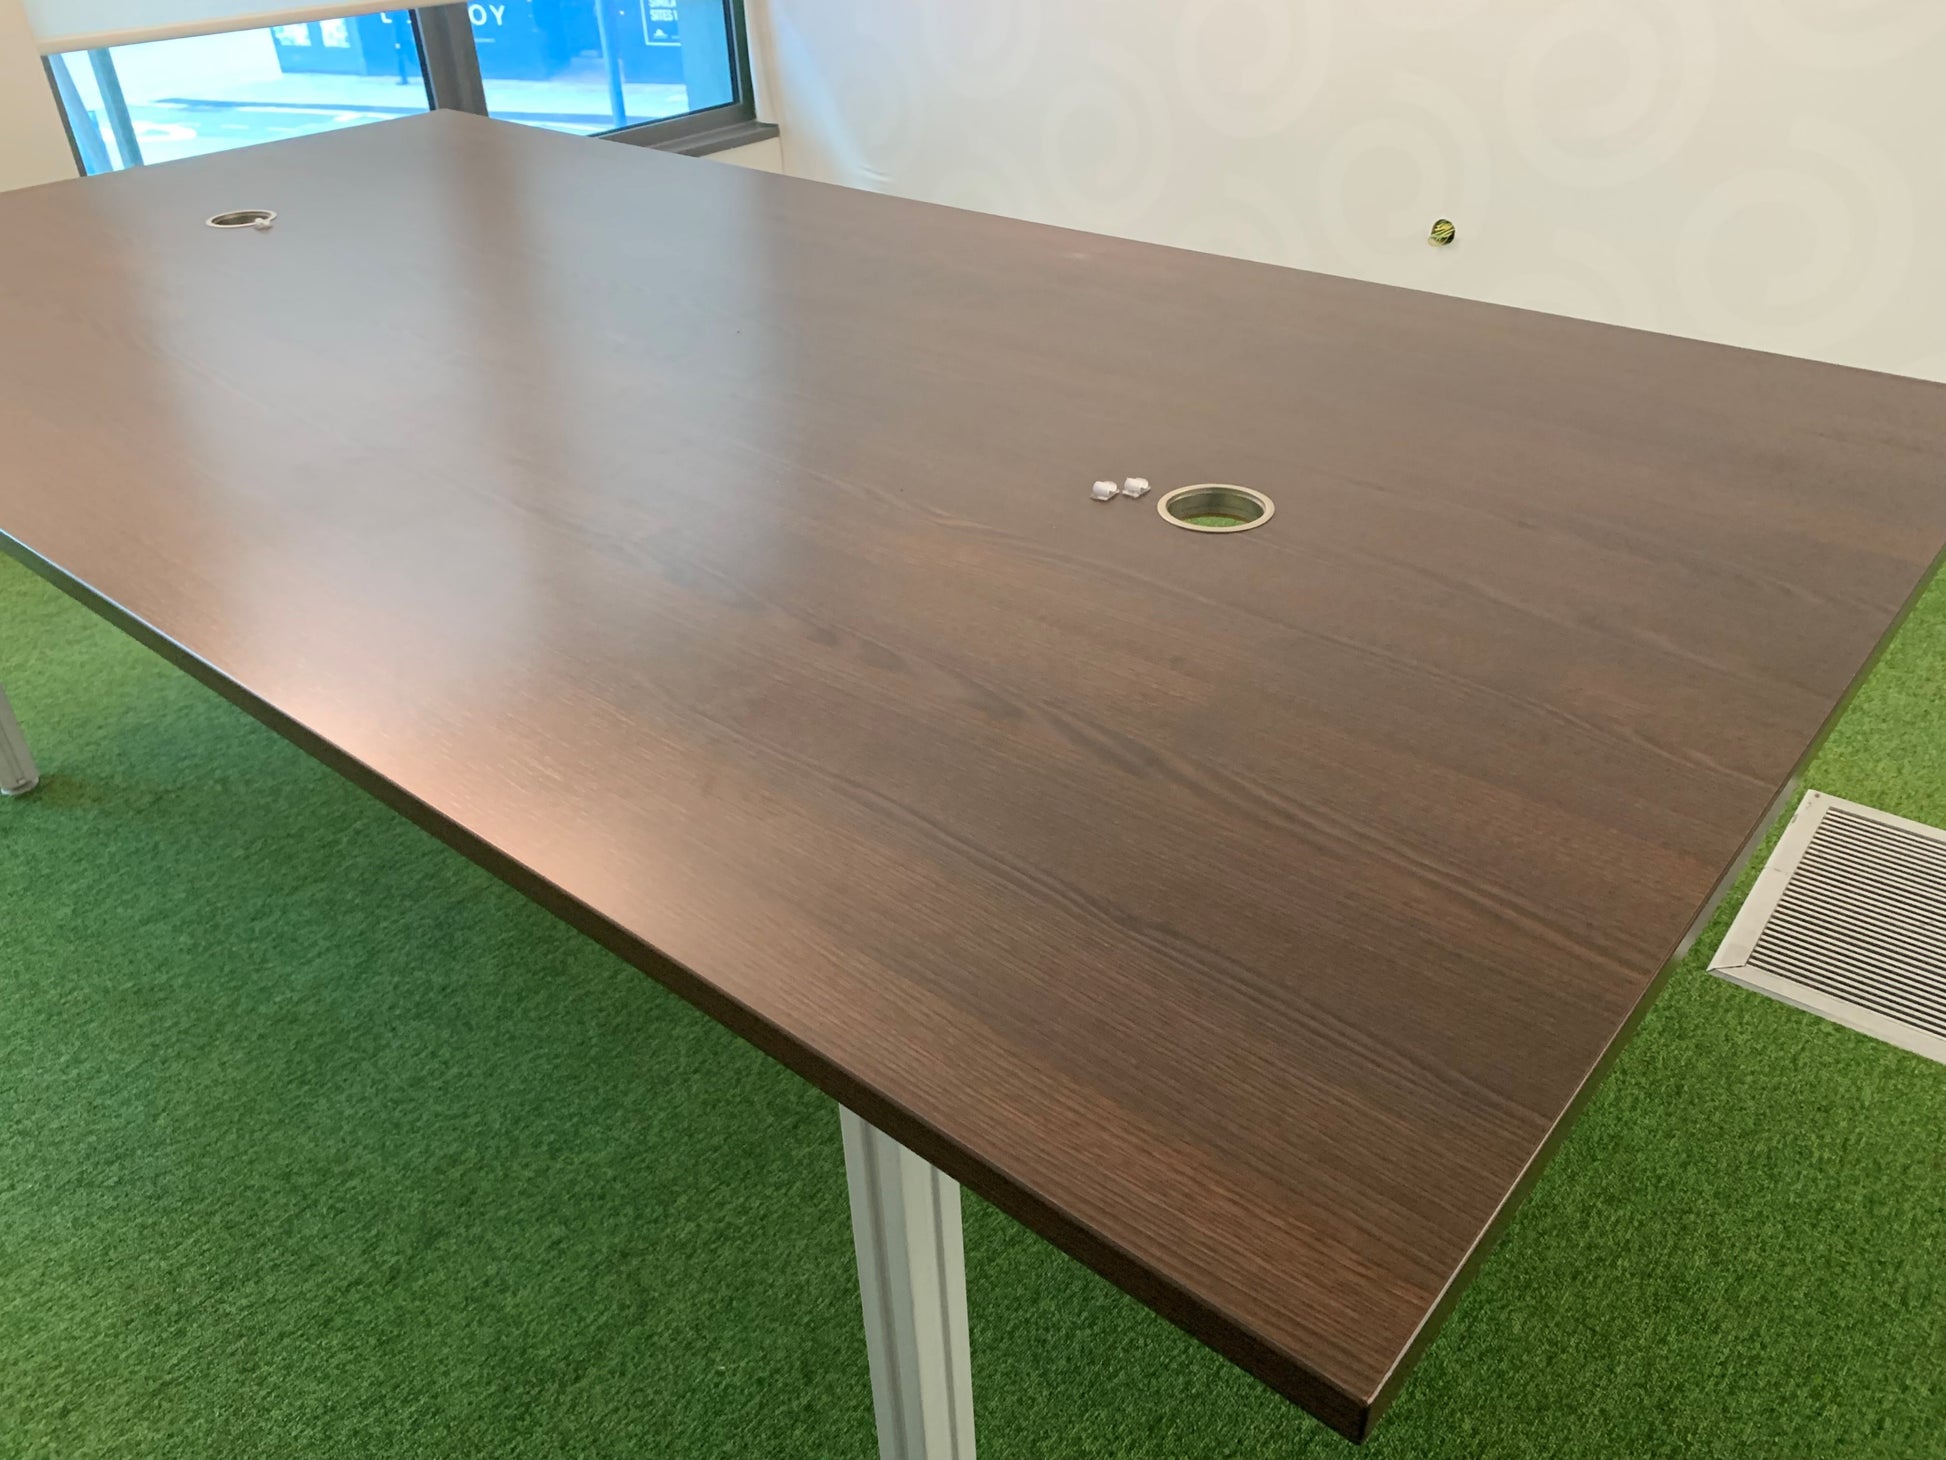 Boardroom table with two cable ports